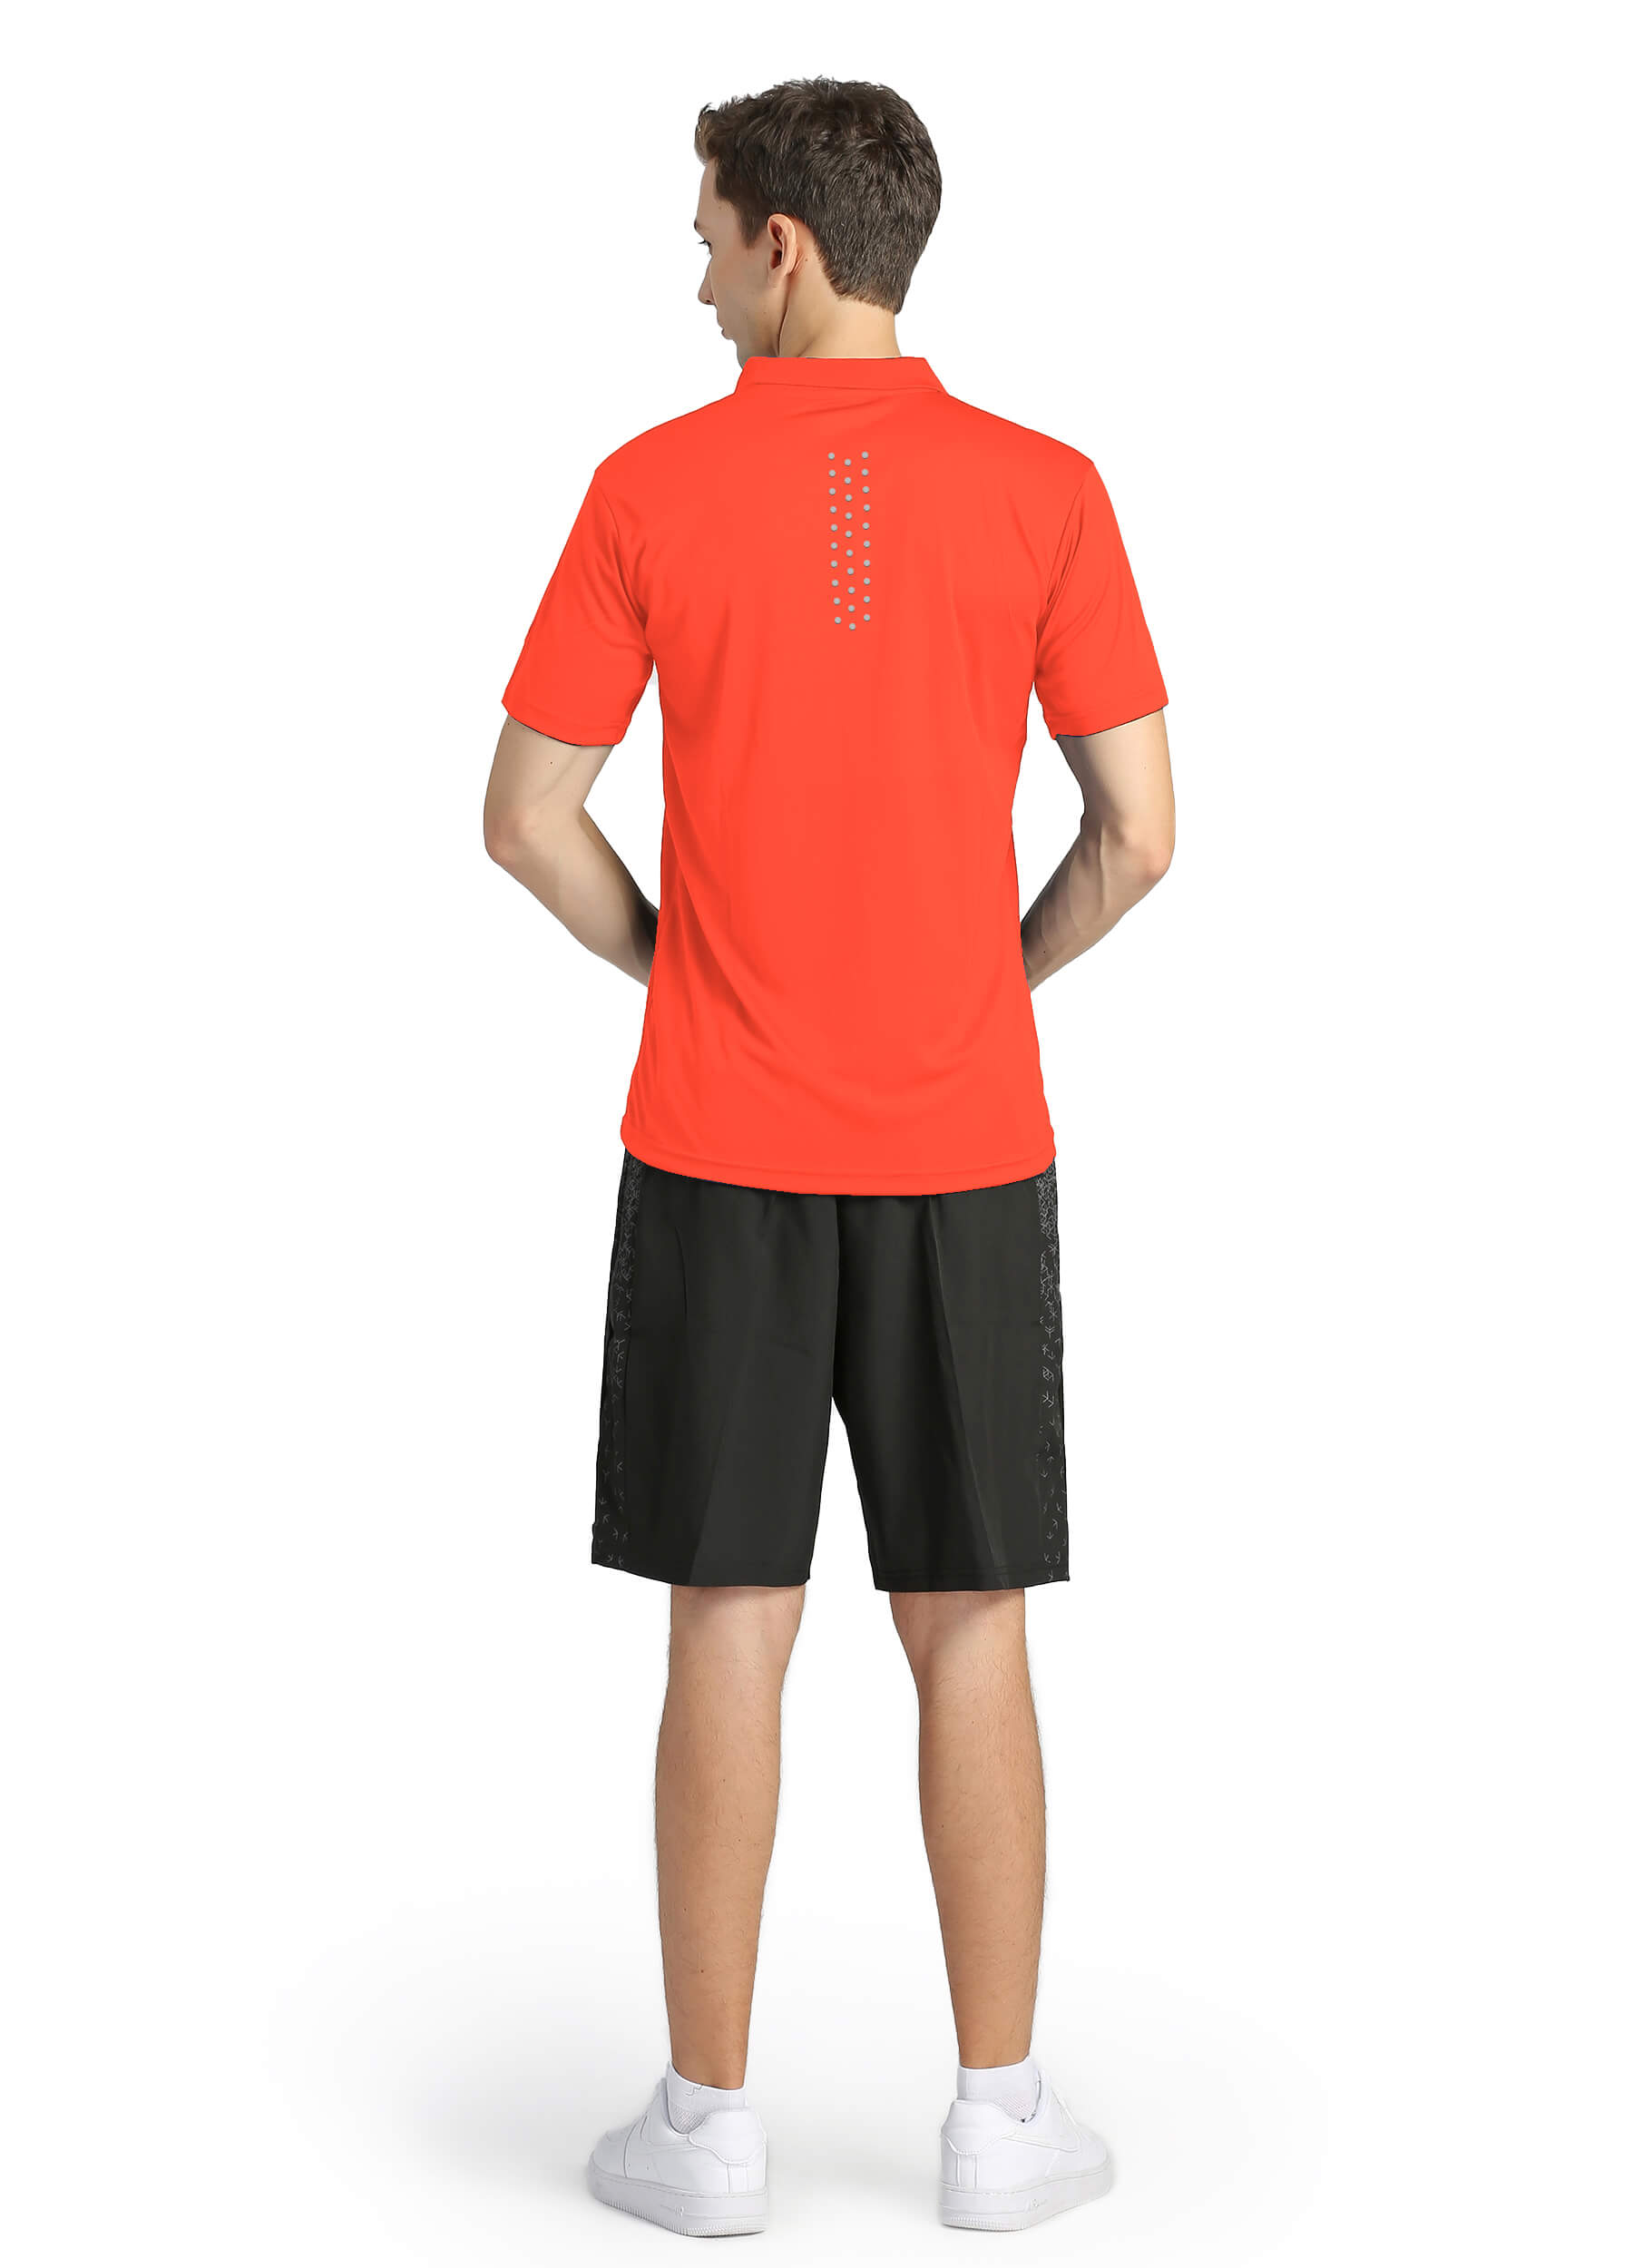 4POSE Men's Orange Moisture Wicking Quick Dry Golf Workout Polo Shirt (Clearance)